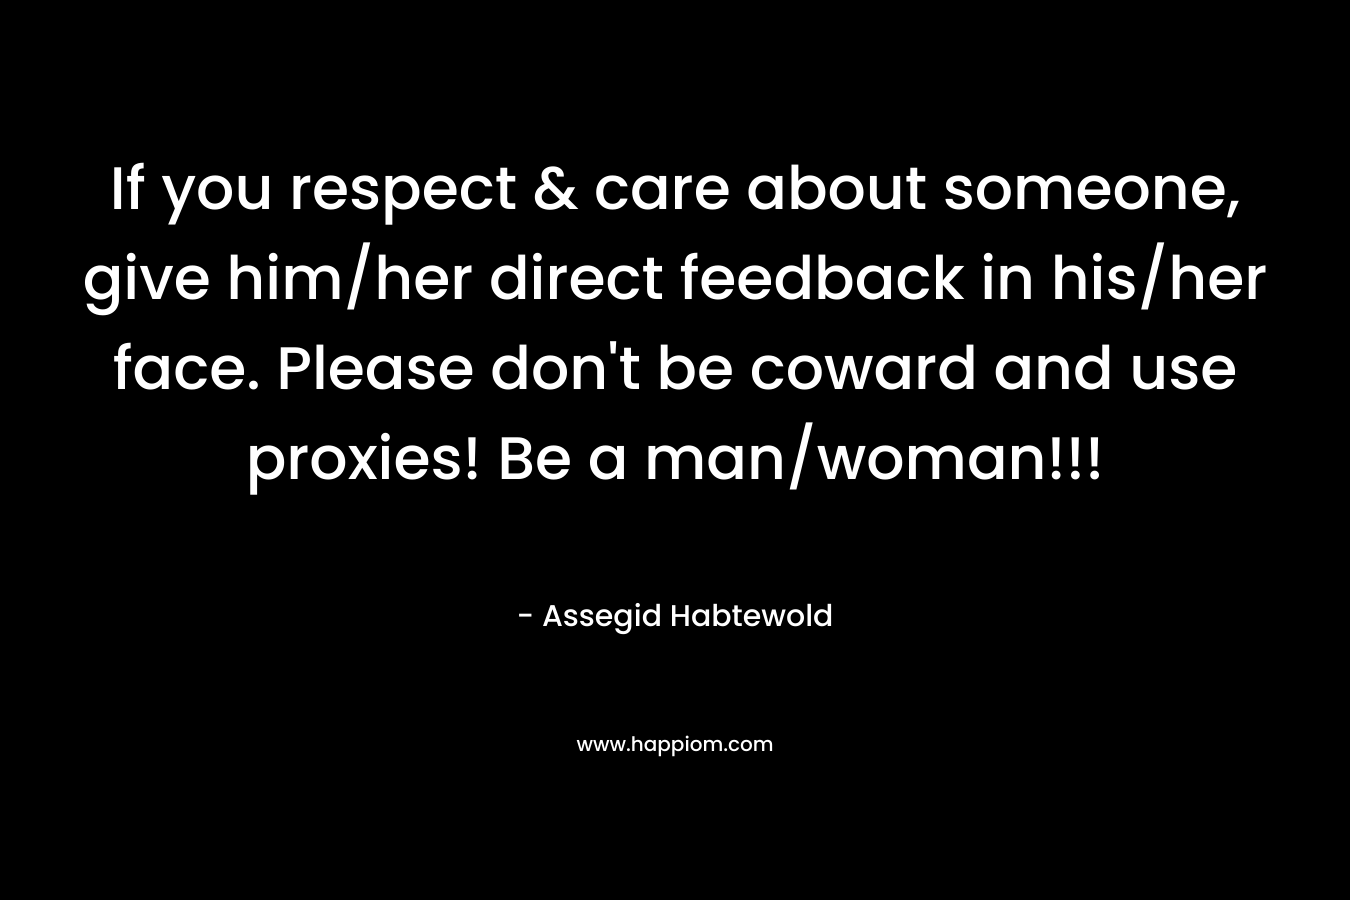 If you respect & care about someone, give him/her direct feedback in his/her face. Please don’t be coward and use proxies! Be a man/woman!!! – Assegid Habtewold